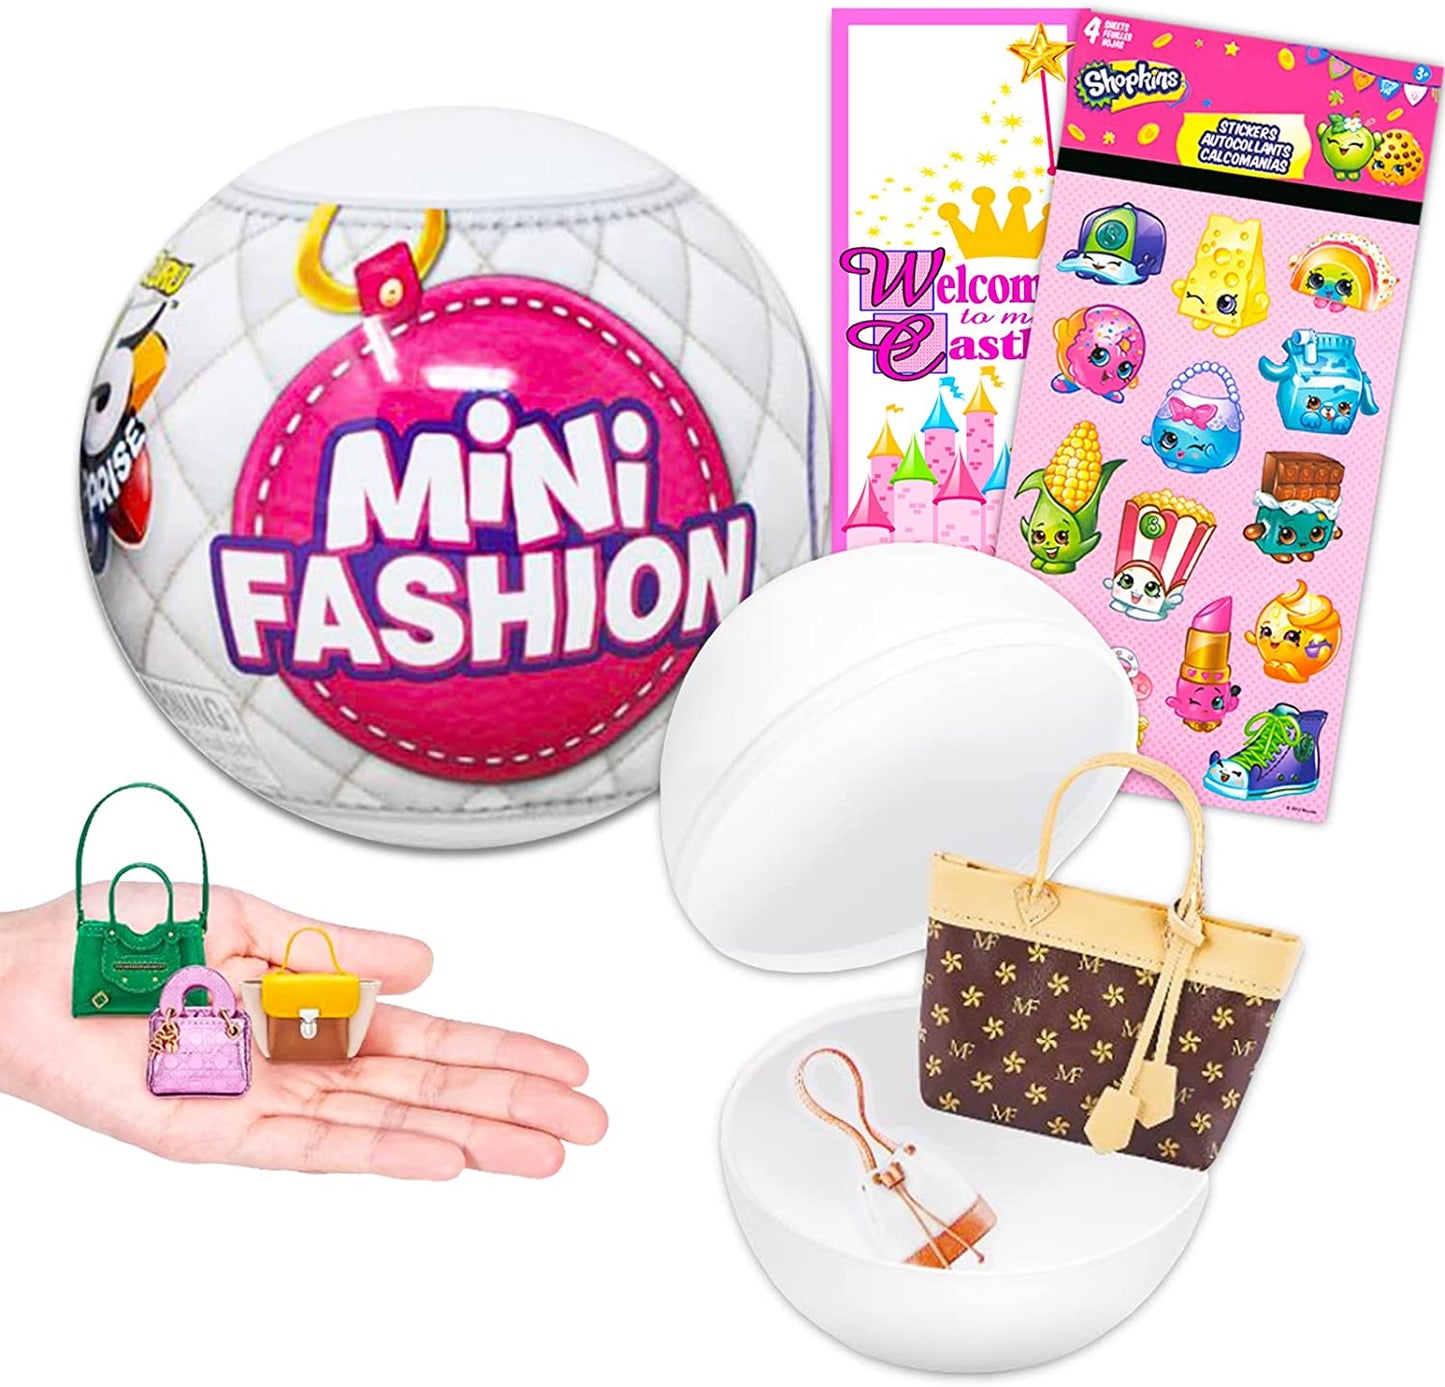 5 Surprise Toy Mini Brands Series1 Mini Toy Store with 5 Mystery Toy Mini  Brands Playset by ZURU 